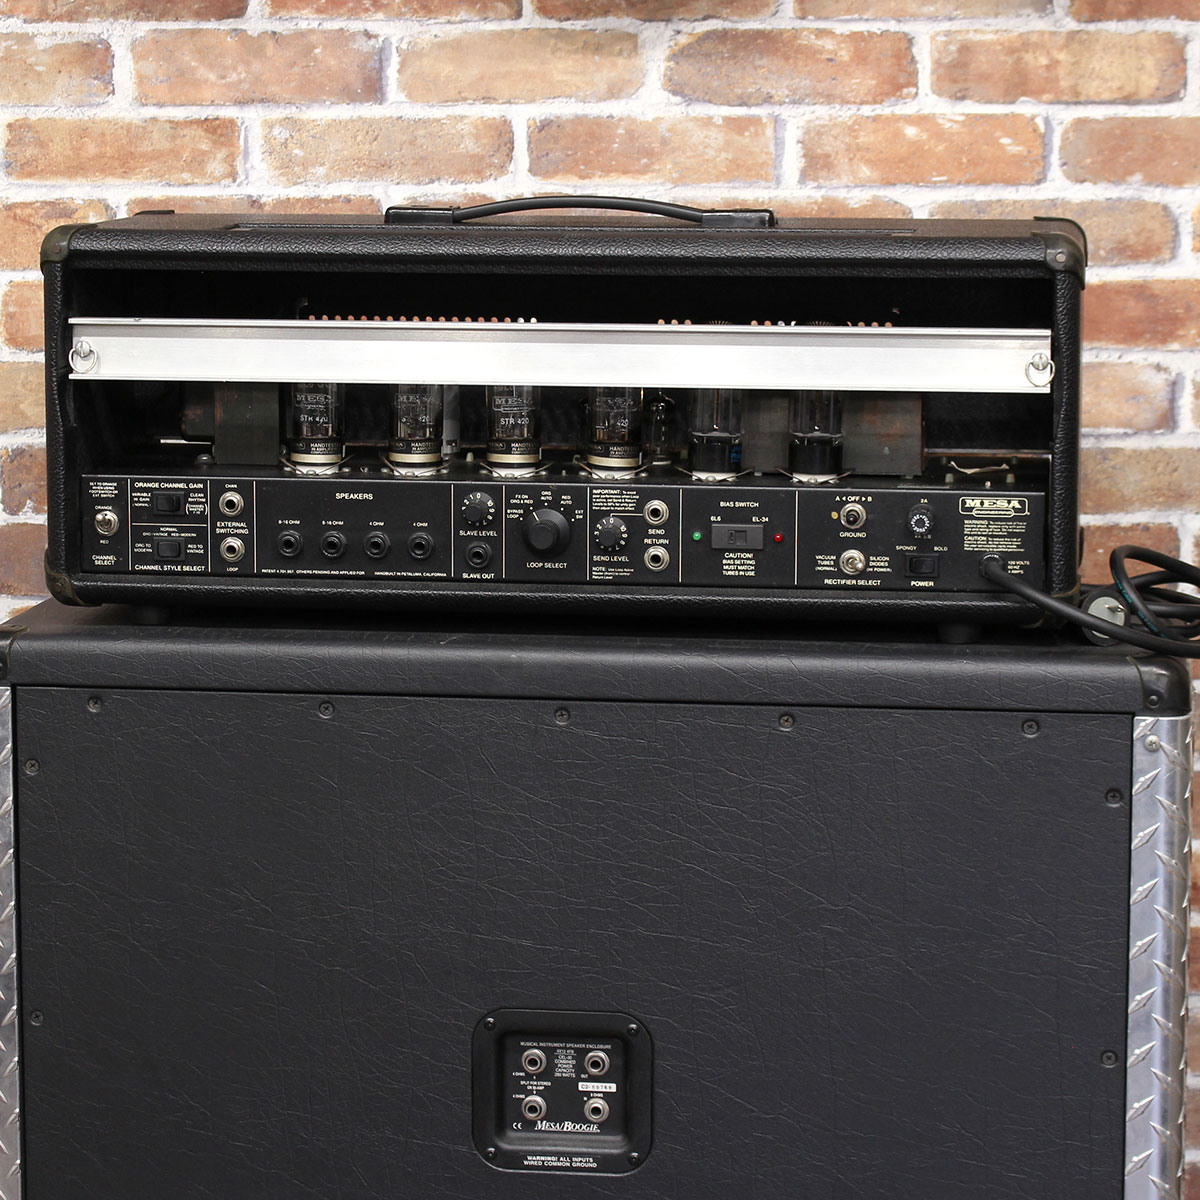 1992 Mesa Boogie Dual Rectifier Solo Head Black Chassis ”Revision D” ＆ 4FB Armor Cabinet - 6.jpg